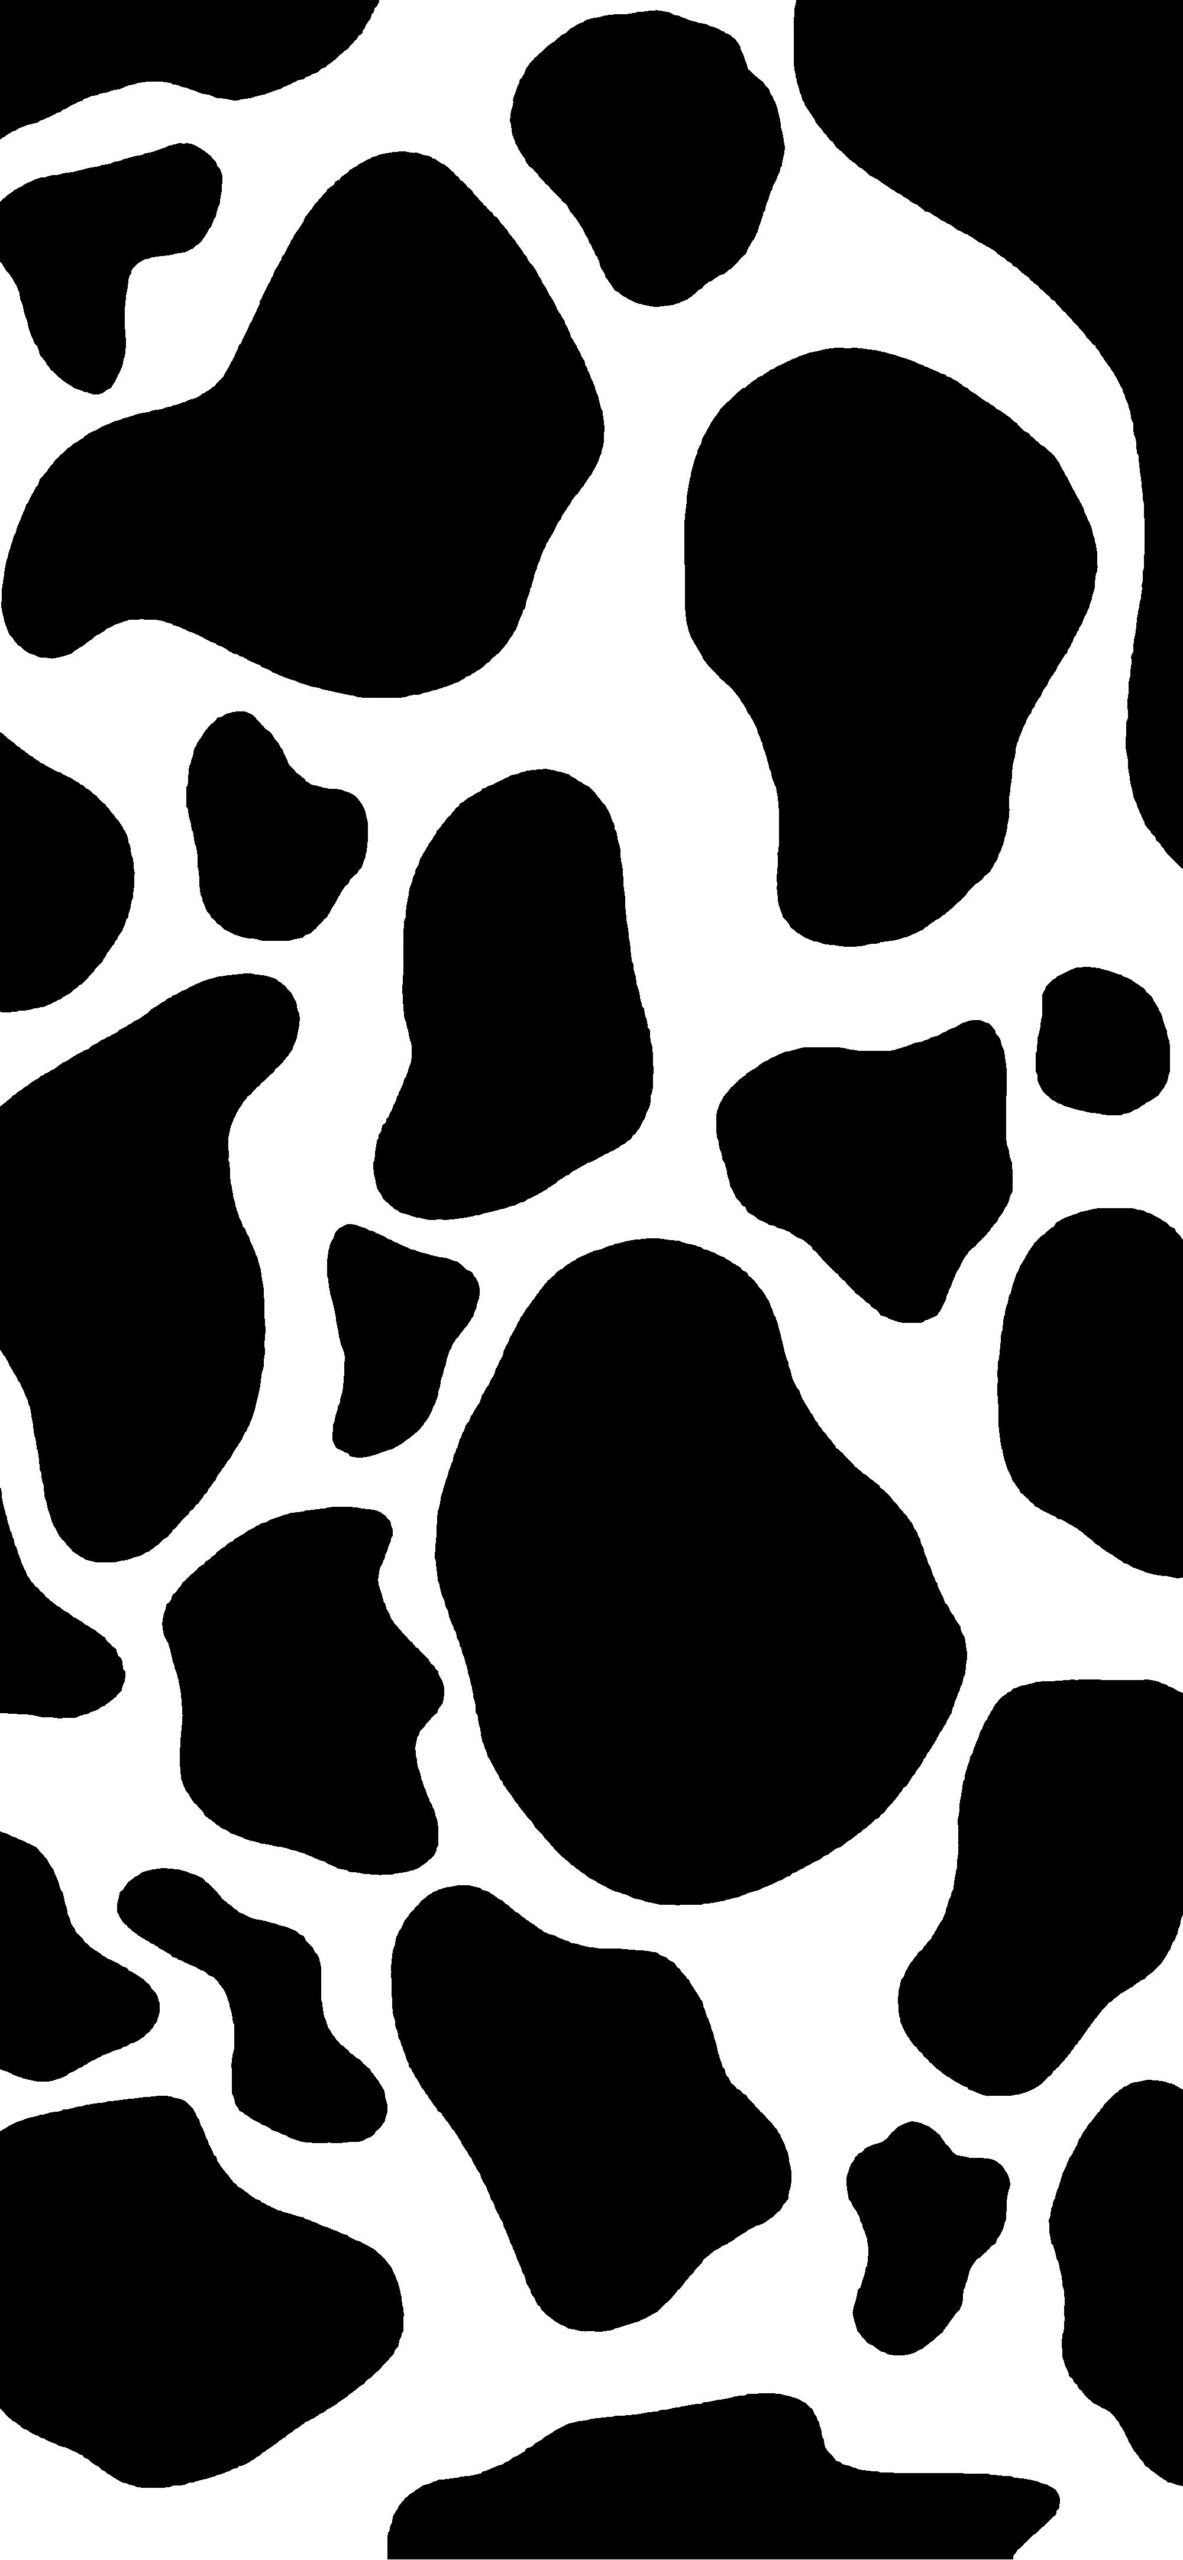 Cow pattern wallpapers